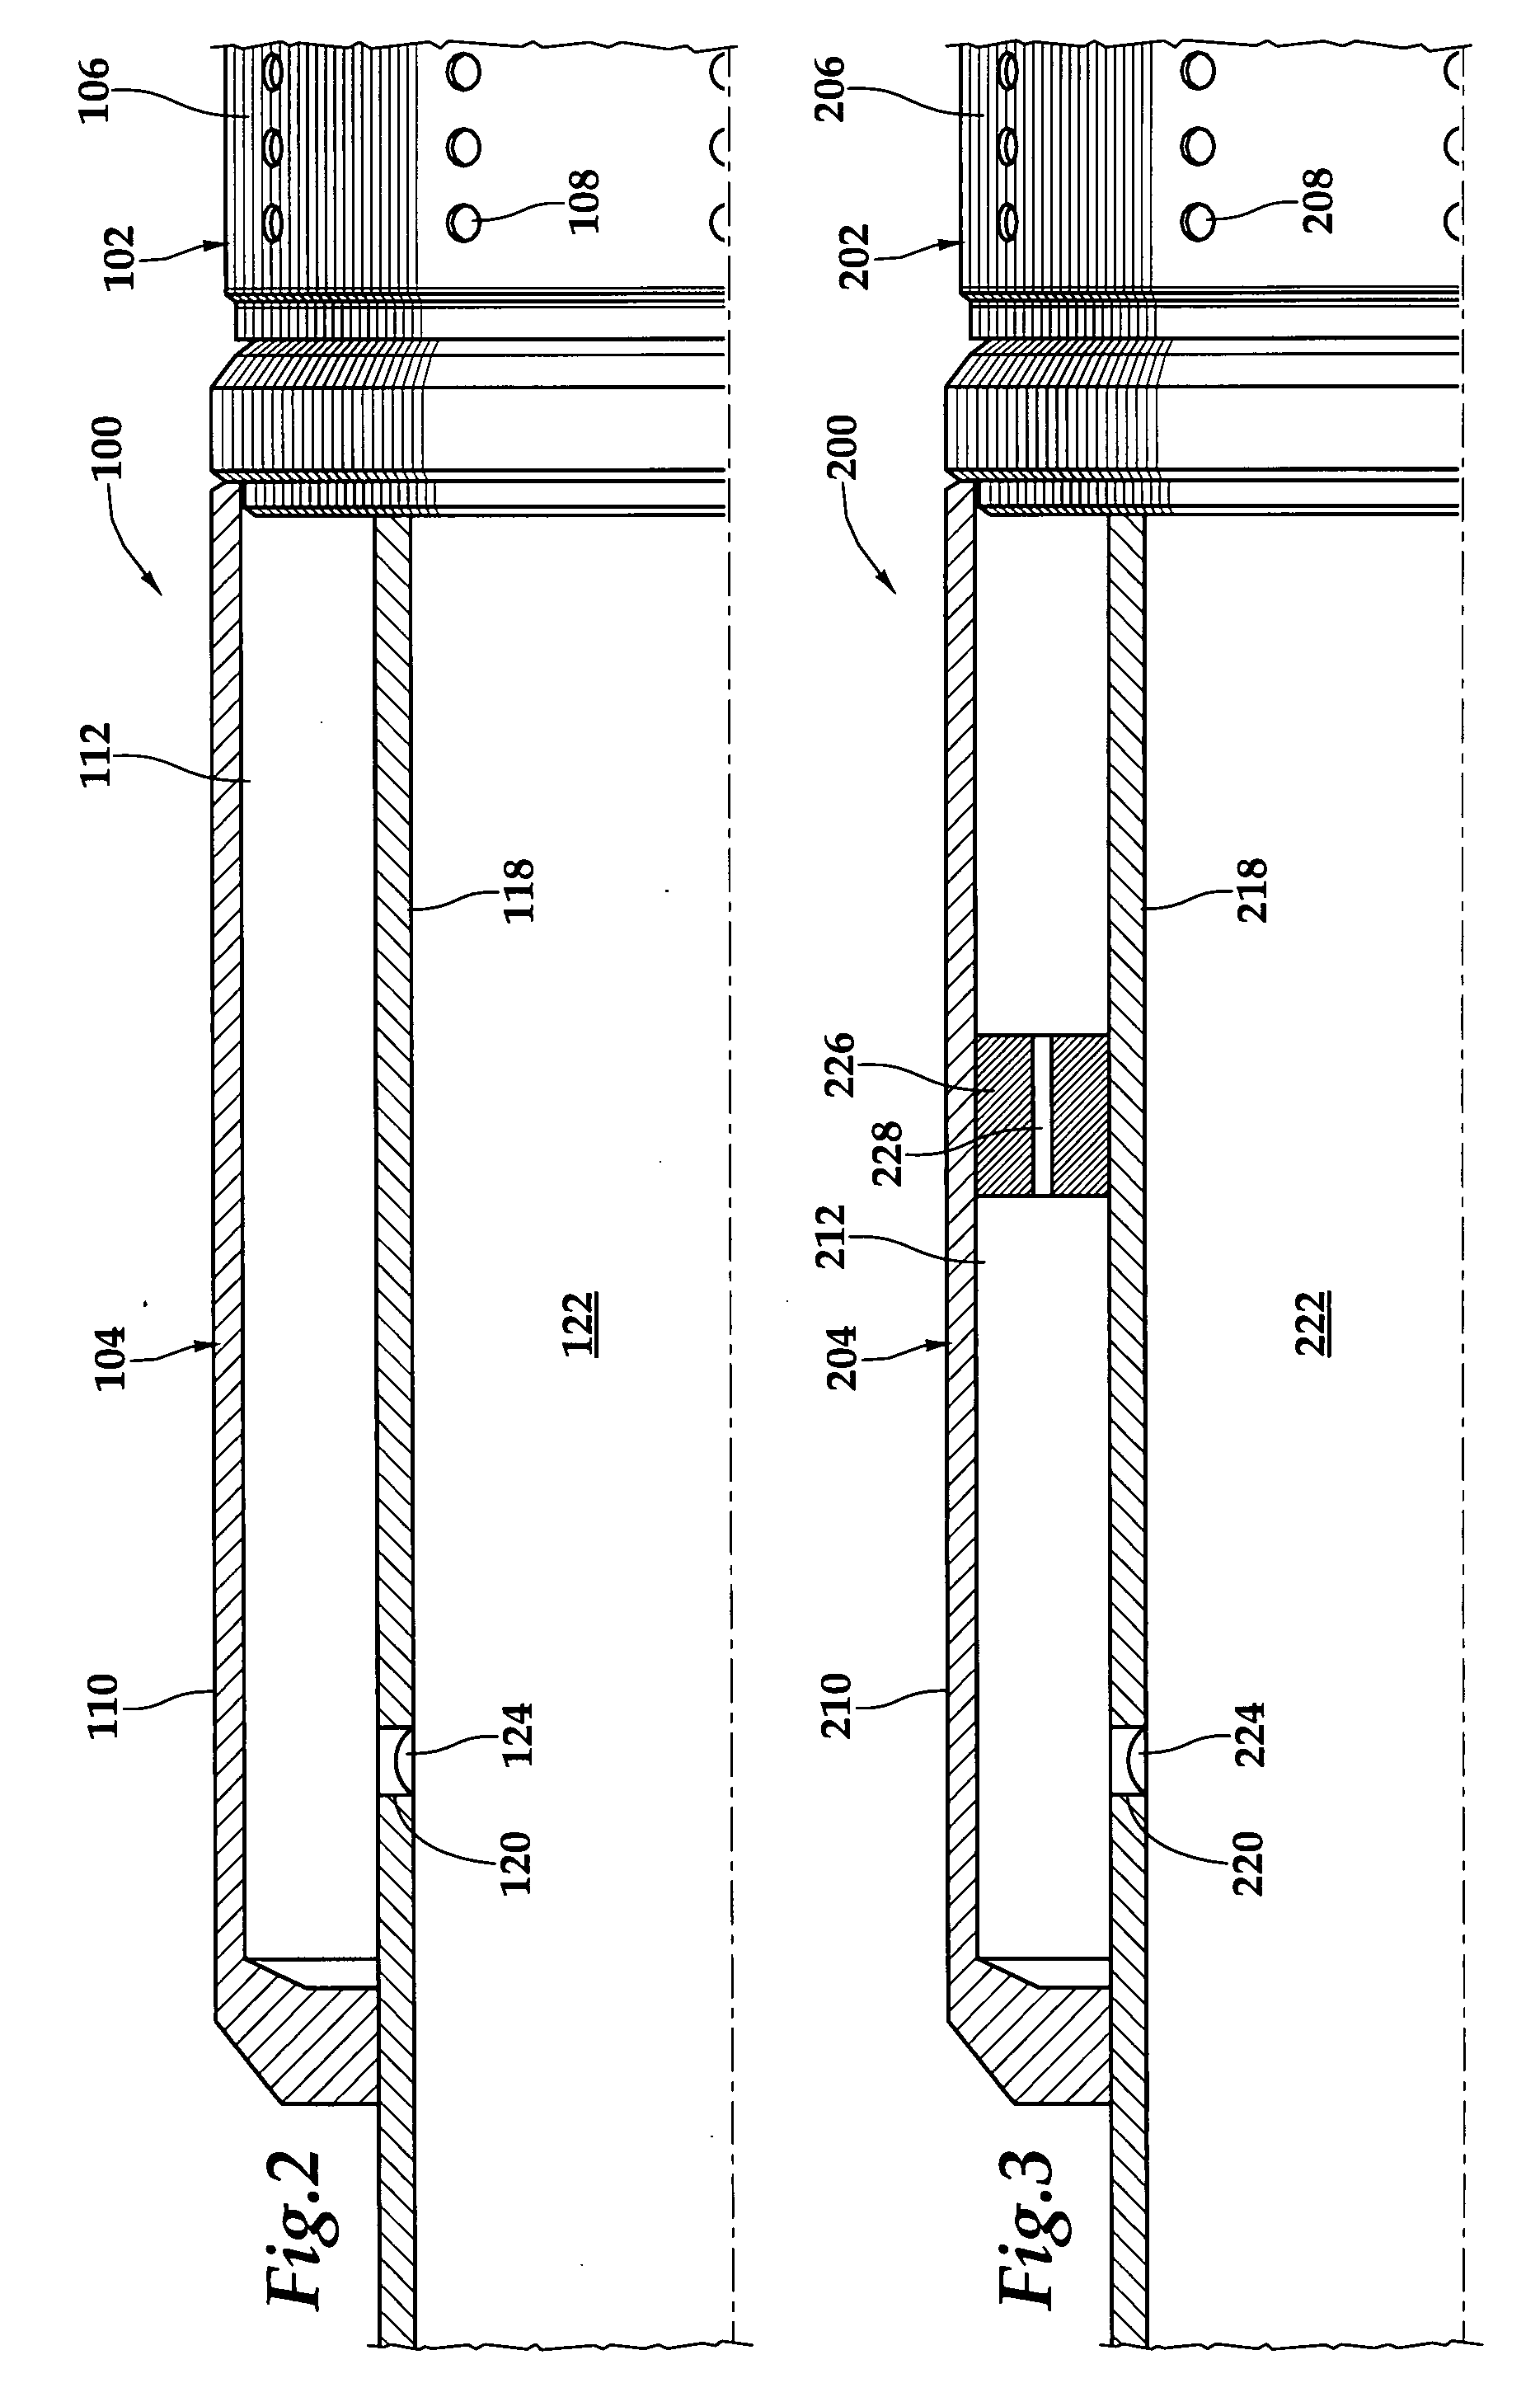 Apparatus for adjustably controlling the inflow of production fluids from a subterranean well